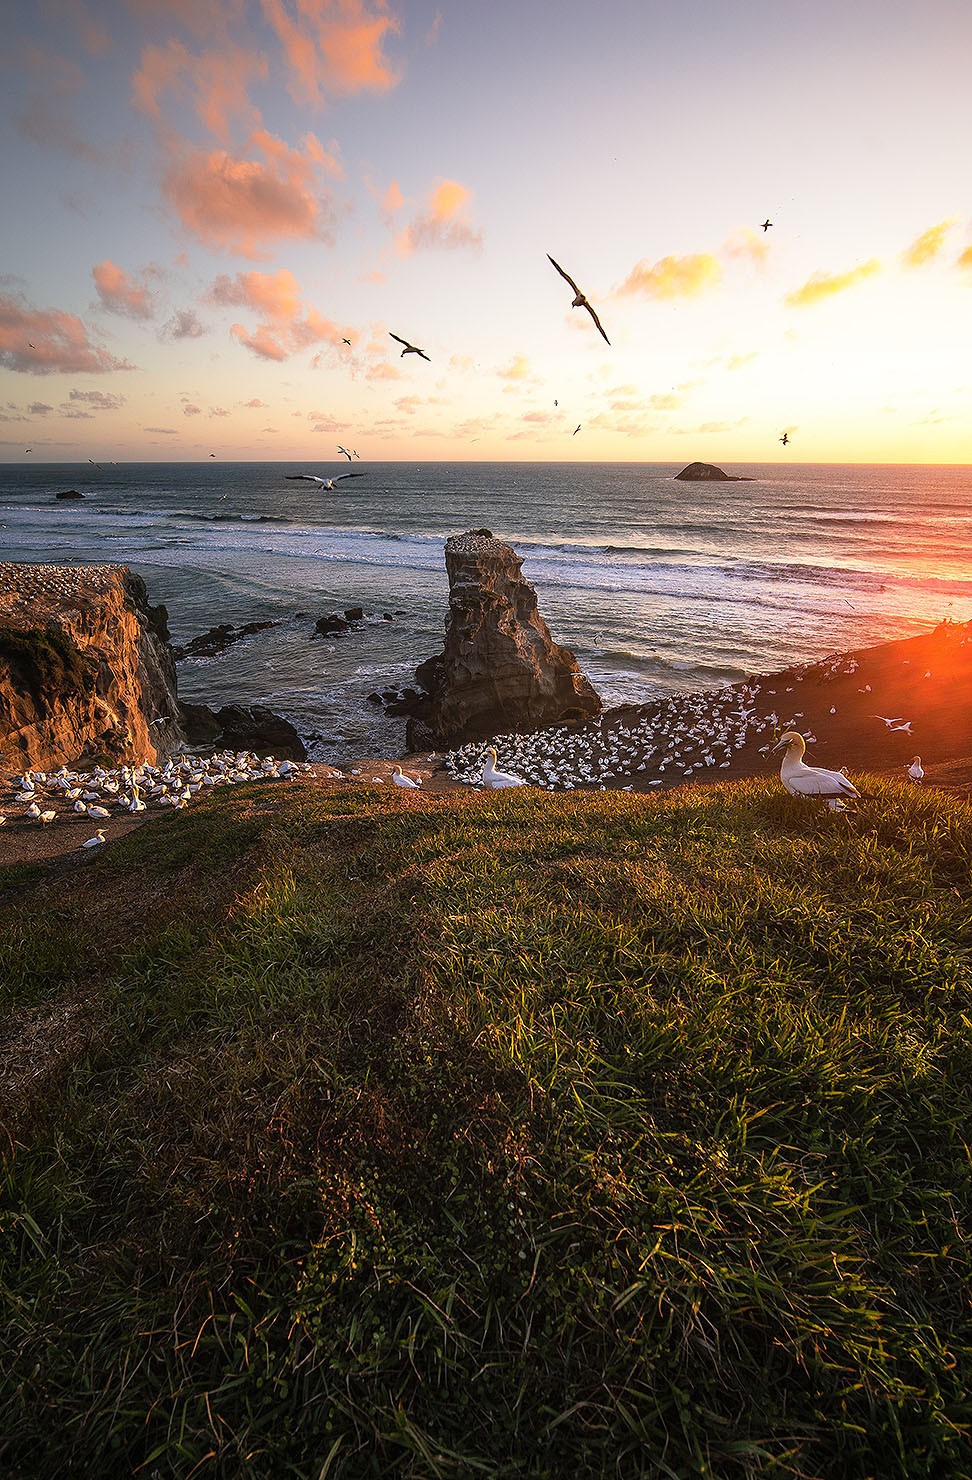 Gannets at the gannet colony in Muriwai at dusk.